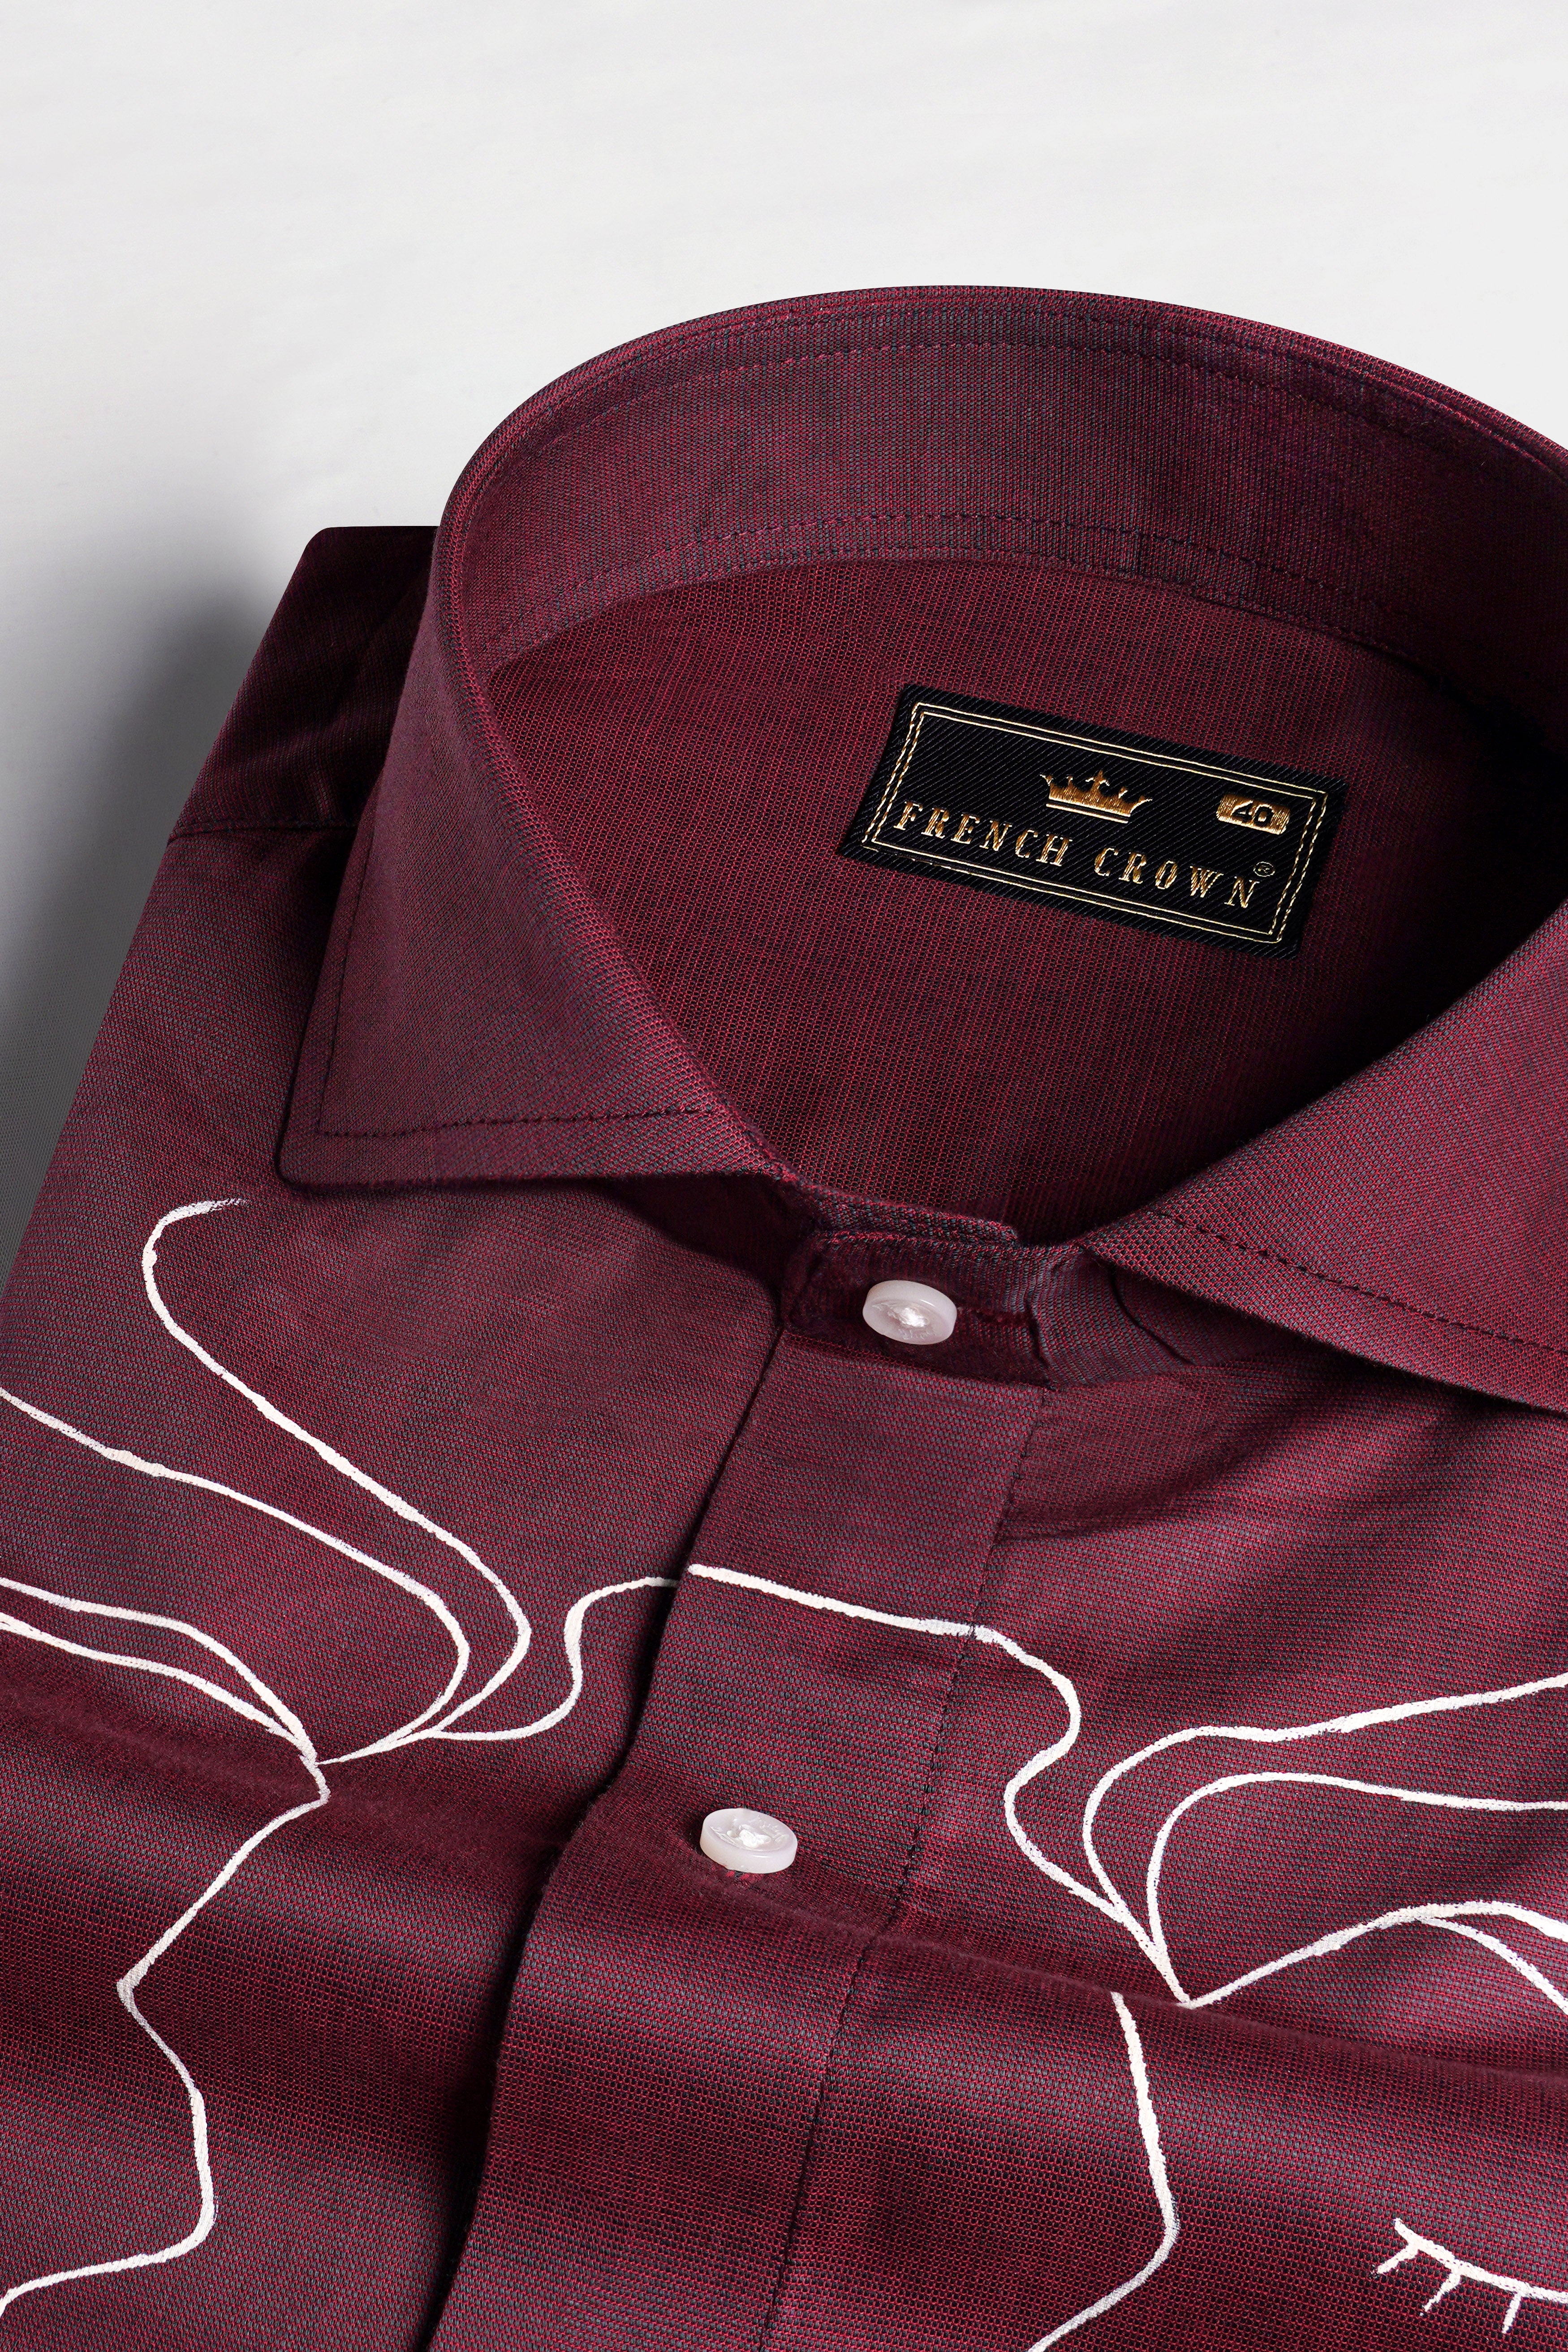 Wine Berry Face Like Hand Painted Chambray Designer Shirt 6481-CA-ART-38, 6481-CA-ART-H-38, 6481-CA-ART-39, 6481-CA-ART-H-39, 6481-CA-ART-40, 6481-CA-ART-H-40, 6481-CA-ART-42, 6481-CA-ART-H-42, 6481-CA-ART-44, 6481-CA-ART-H-44, 6481-CA-ART-46, 6481-CA-ART-H-46, 6481-CA-ART-48, 6481-CA-ART-H-48, 6481-CA-ART-50, 6481-CA-ART-H-50, 6481-CA-ART-52, 6481-CA-ART-H-52